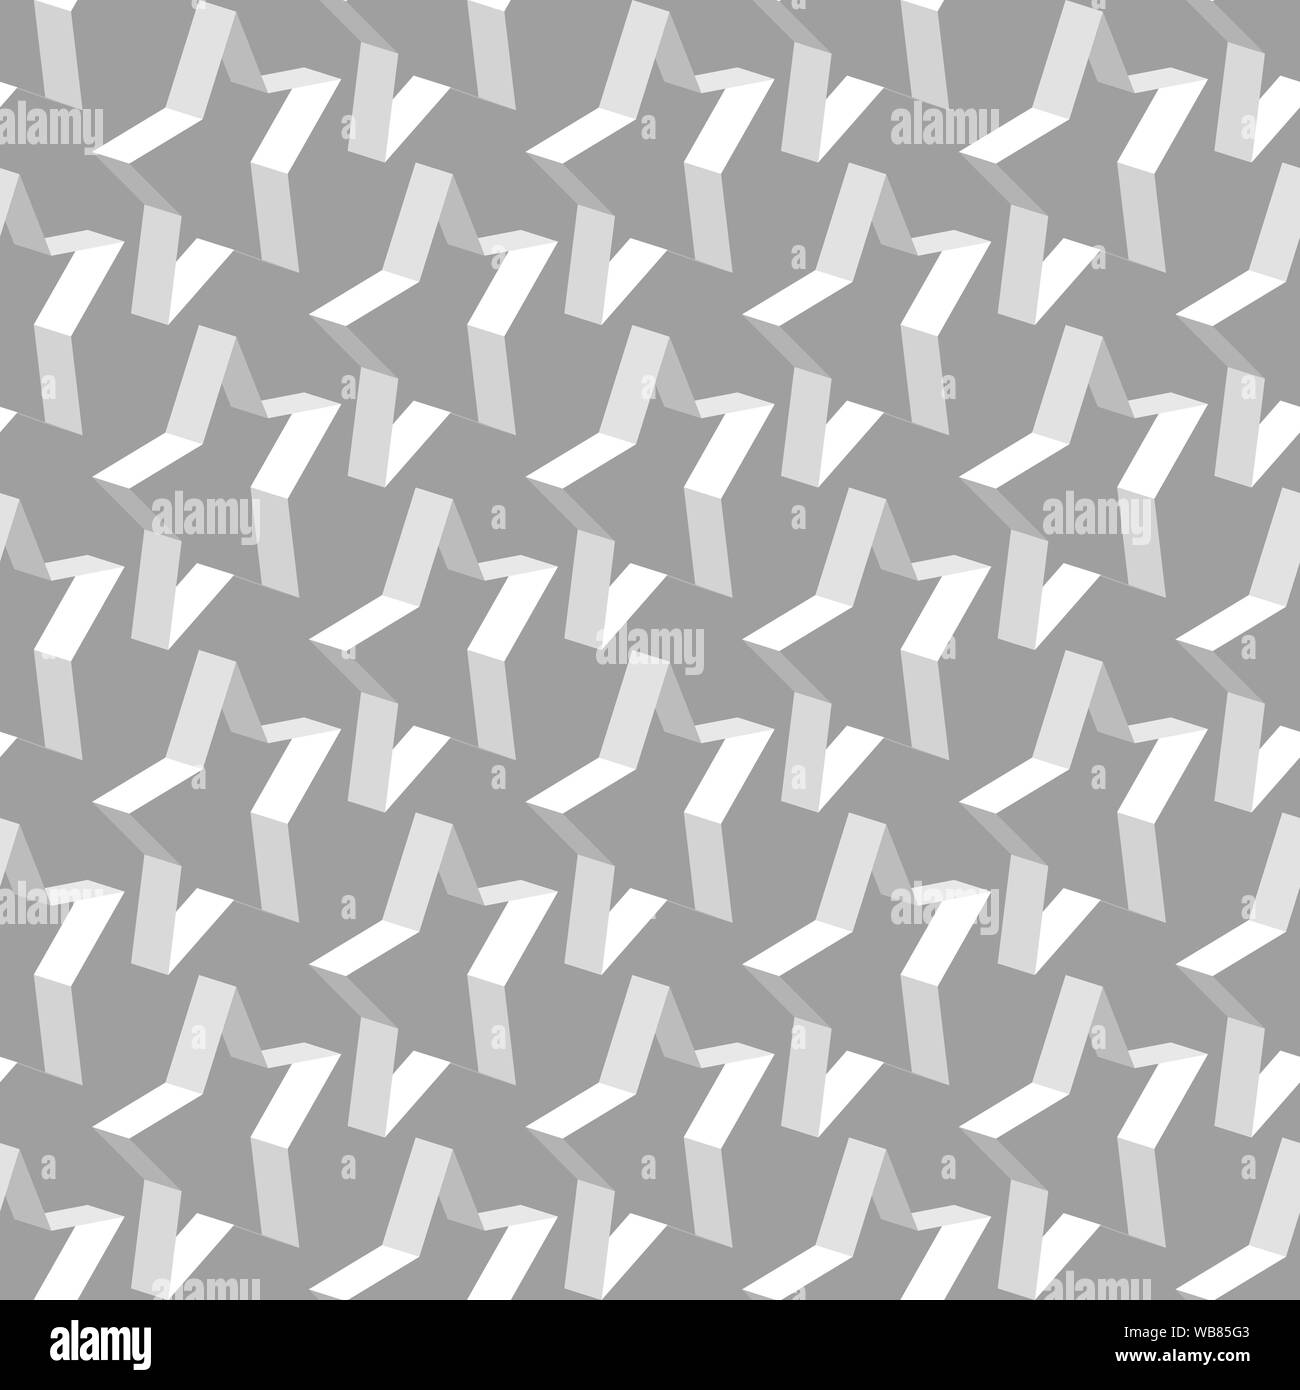 Seamless pattern background with 3d stars, EPS10. Clipping mask applied. This pattern is available as Swatches. Stock Vector